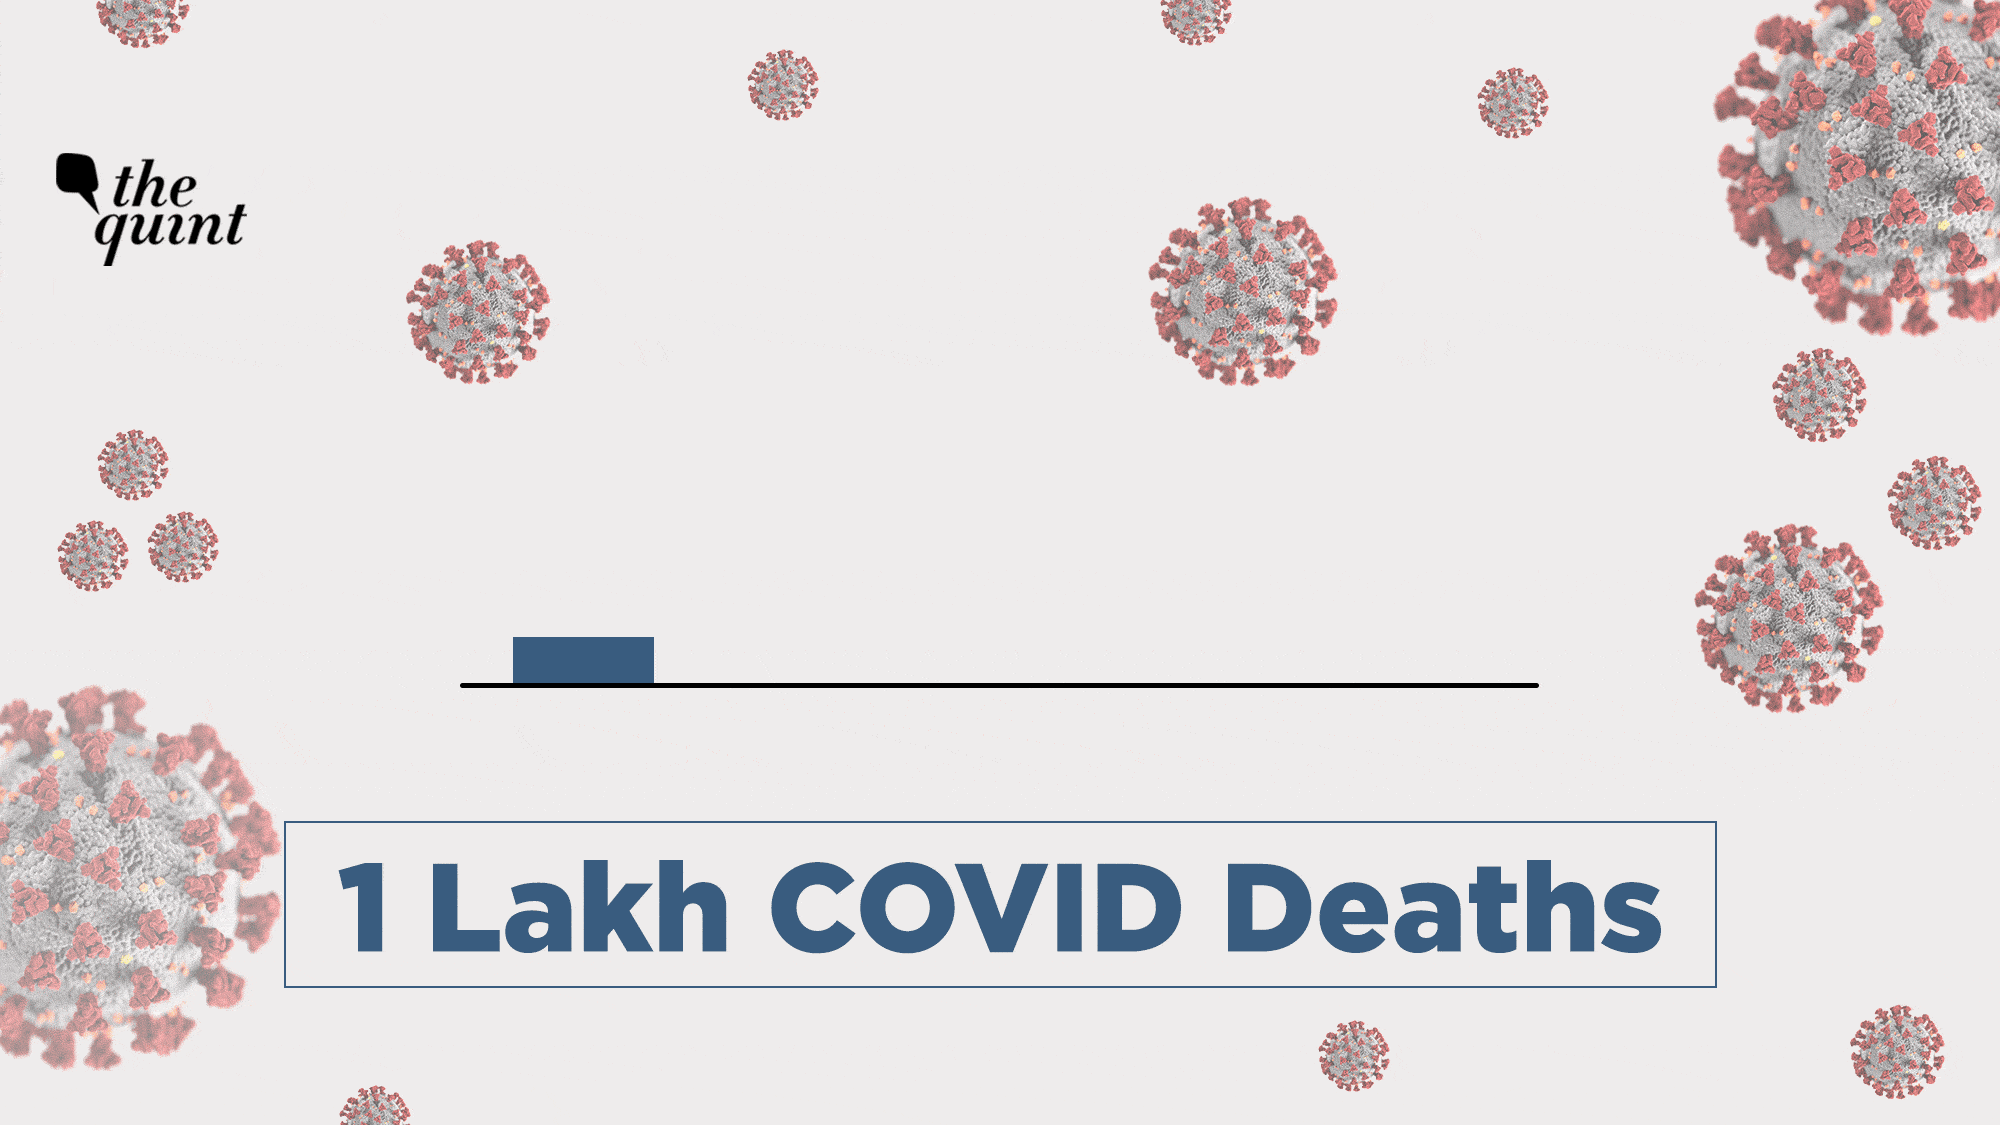 India has crossed the sobering statistic of one lakh deaths caused by the novel coronavirus.